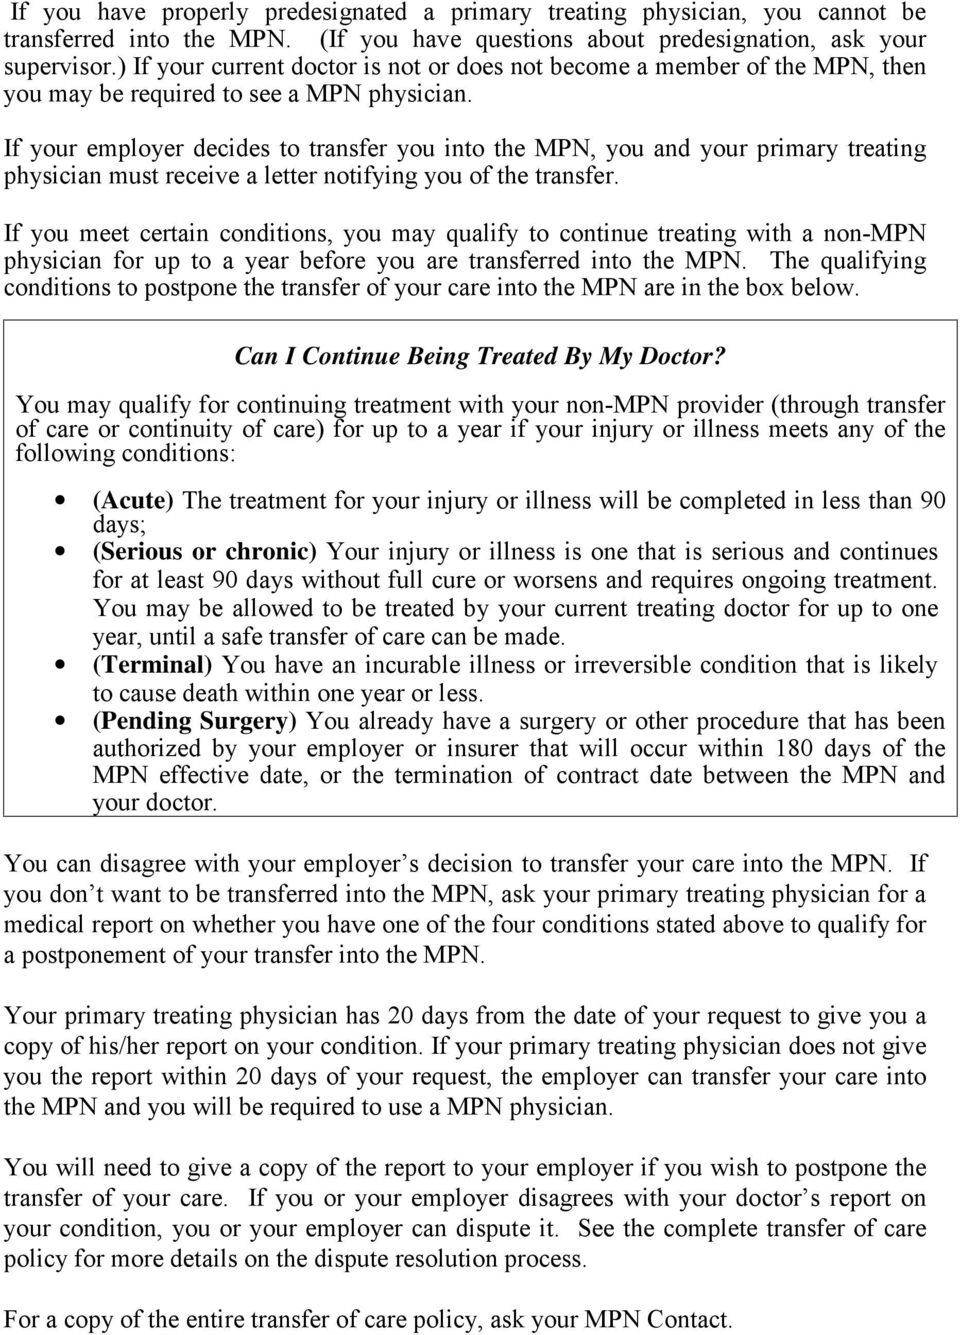 If your employer decides to transfer you into the MPN, you and your primary treating physician must receive a letter notifying you of the transfer.